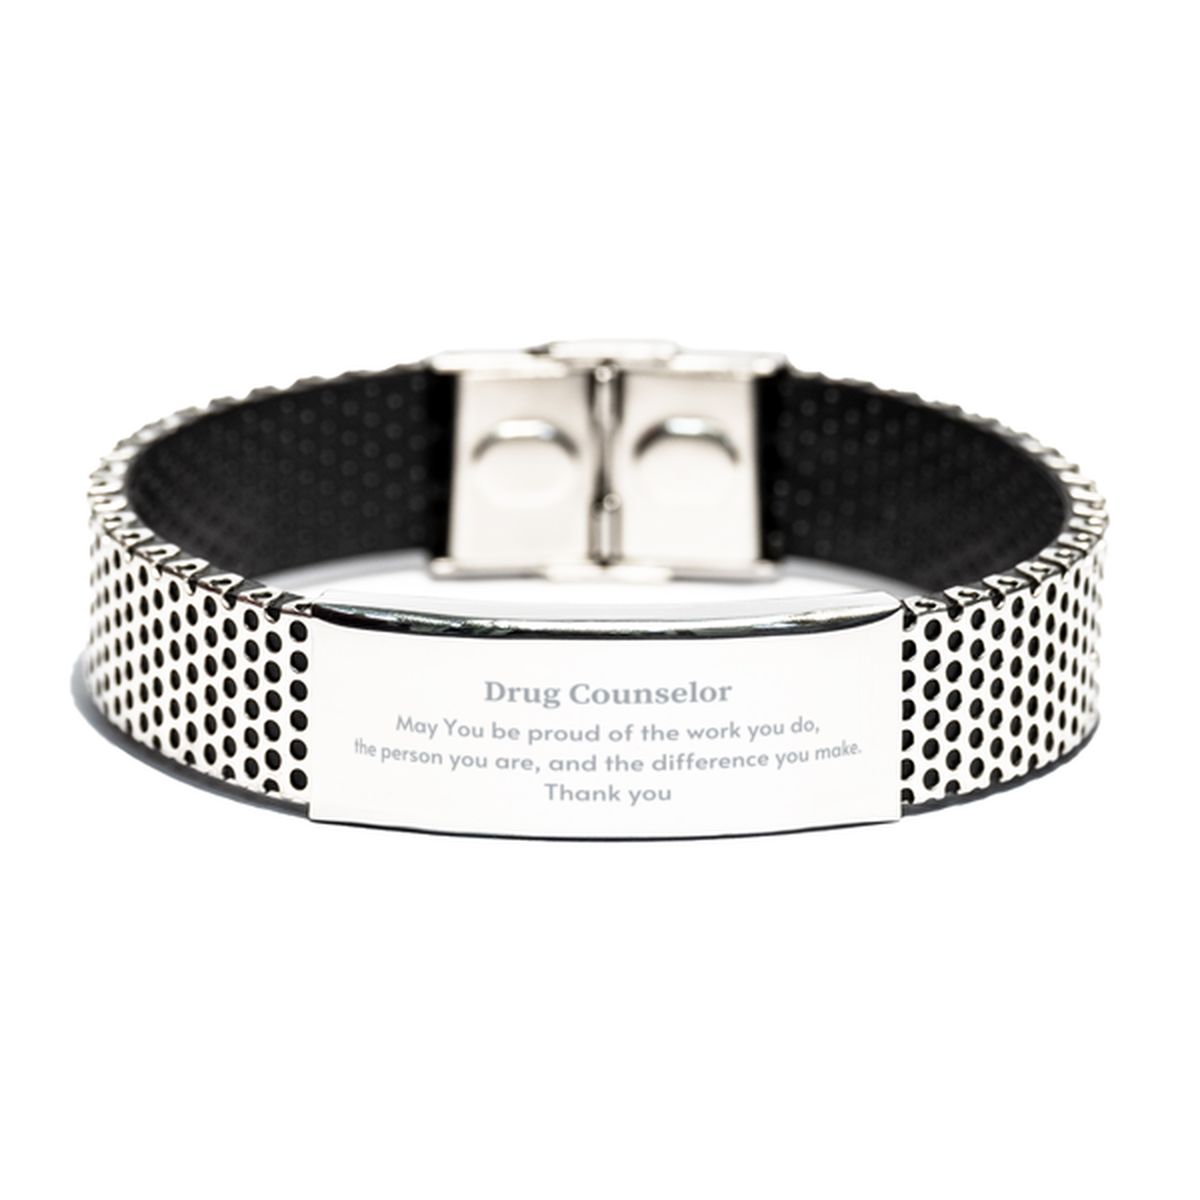 Heartwarming Stainless Steel Bracelet Retirement Coworkers Gifts for Drug Counselor, Drug Counselor May You be proud of the work you do, the person you are Gifts for Boss Men Women Friends